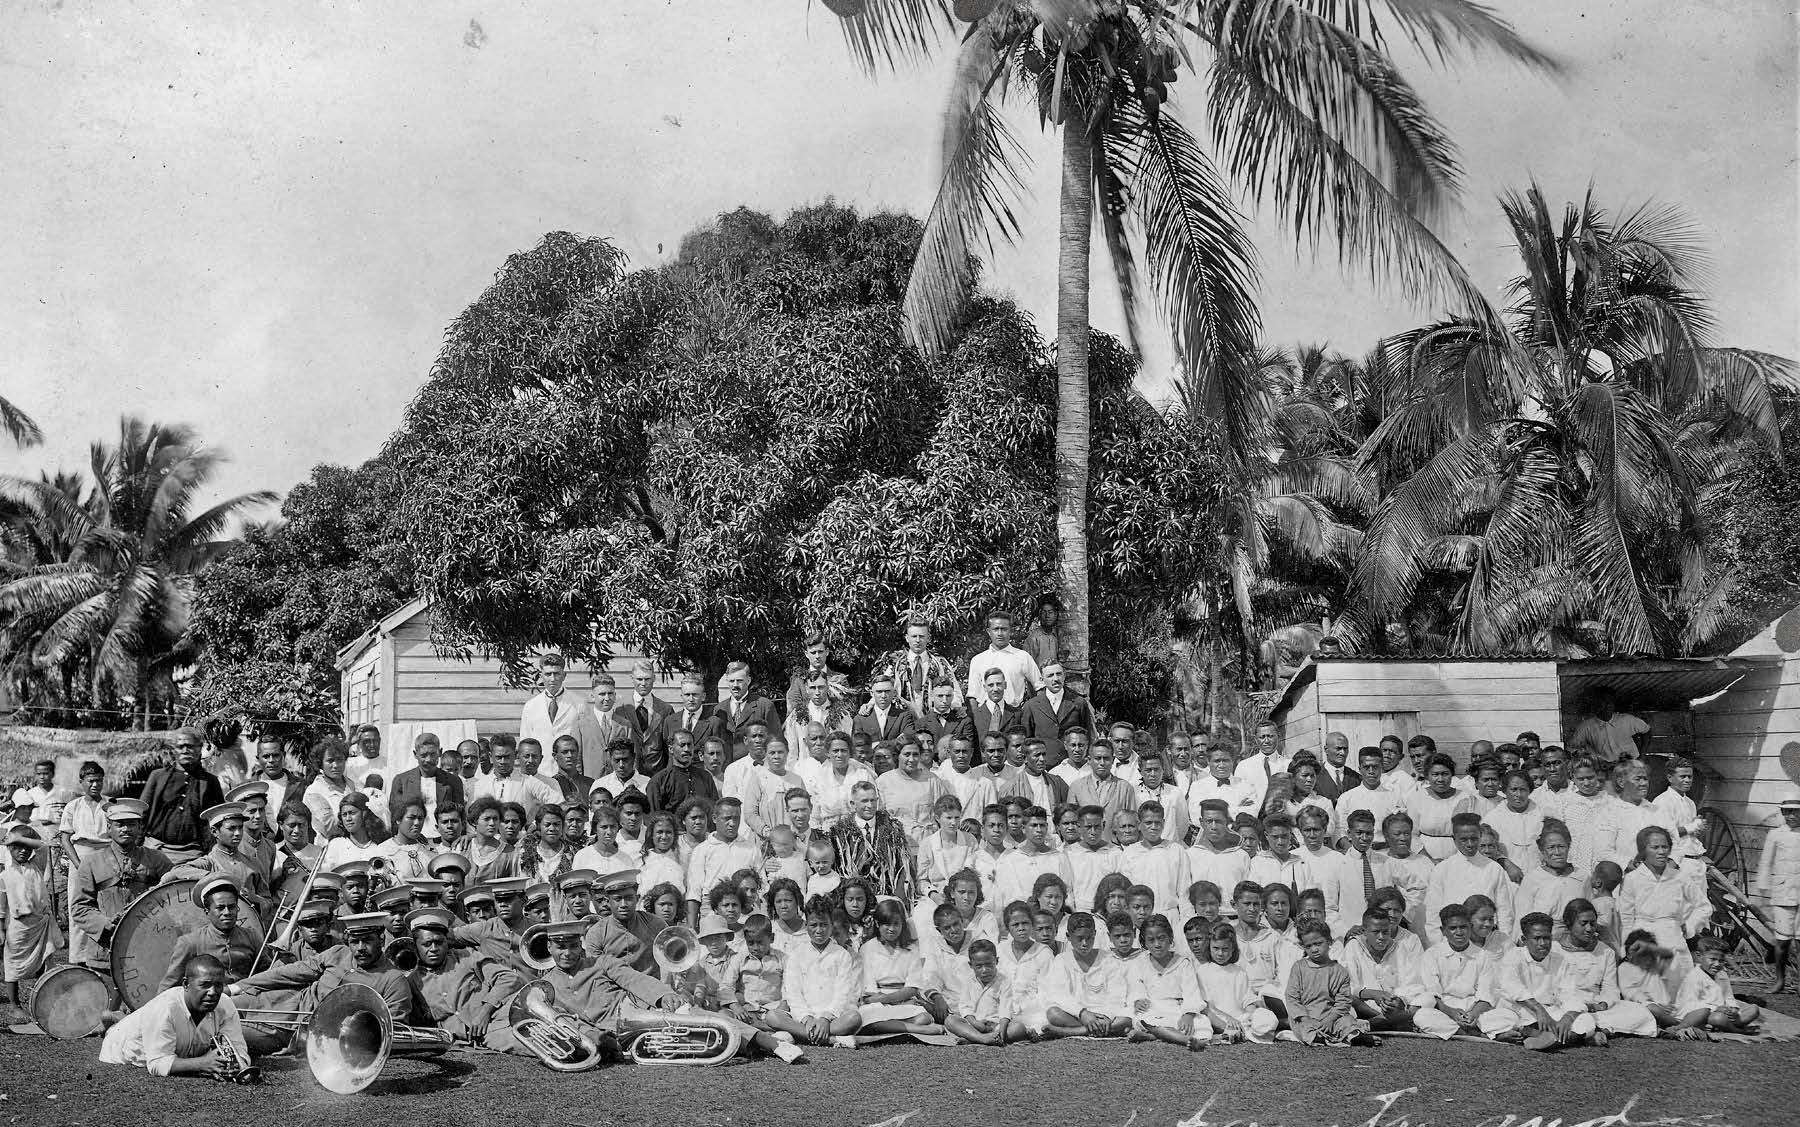 Attendees of the 1921 mission conference with Elder David O. McKay, including the Maamafo‘ou band. Clarence Henderson collection courtesy of Lorraine Morton Ashton.